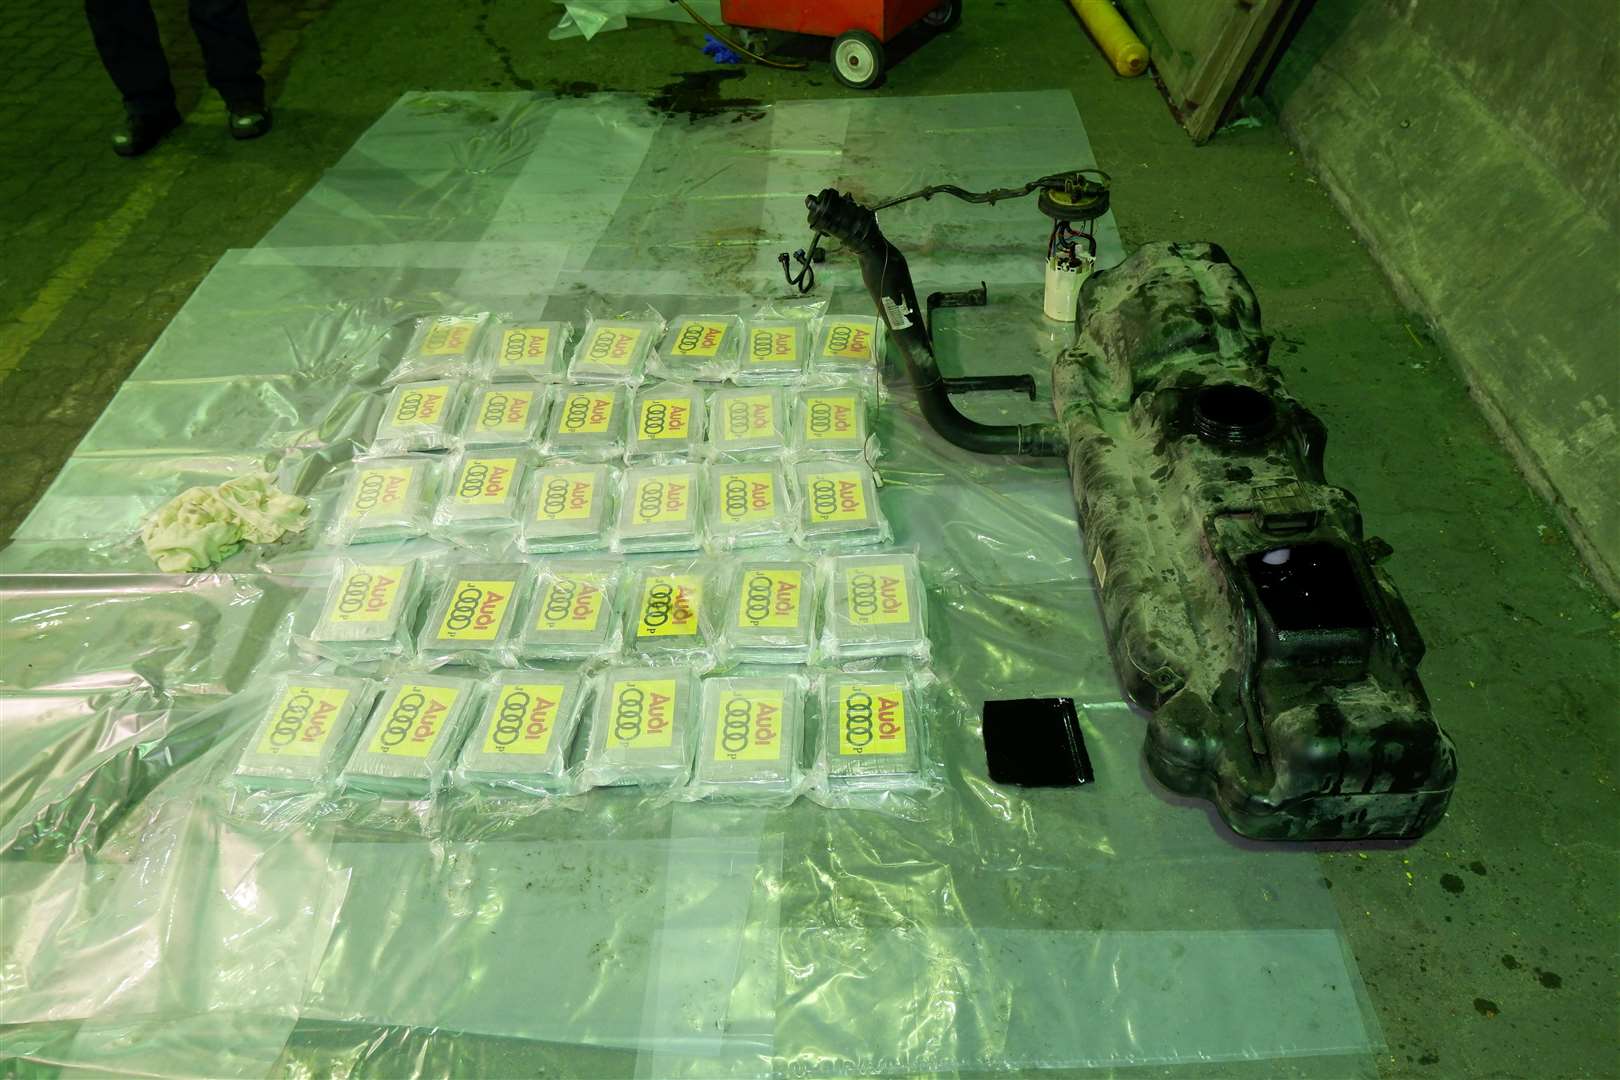 The haul taken from the fuel tank Picture: National Crime Agency